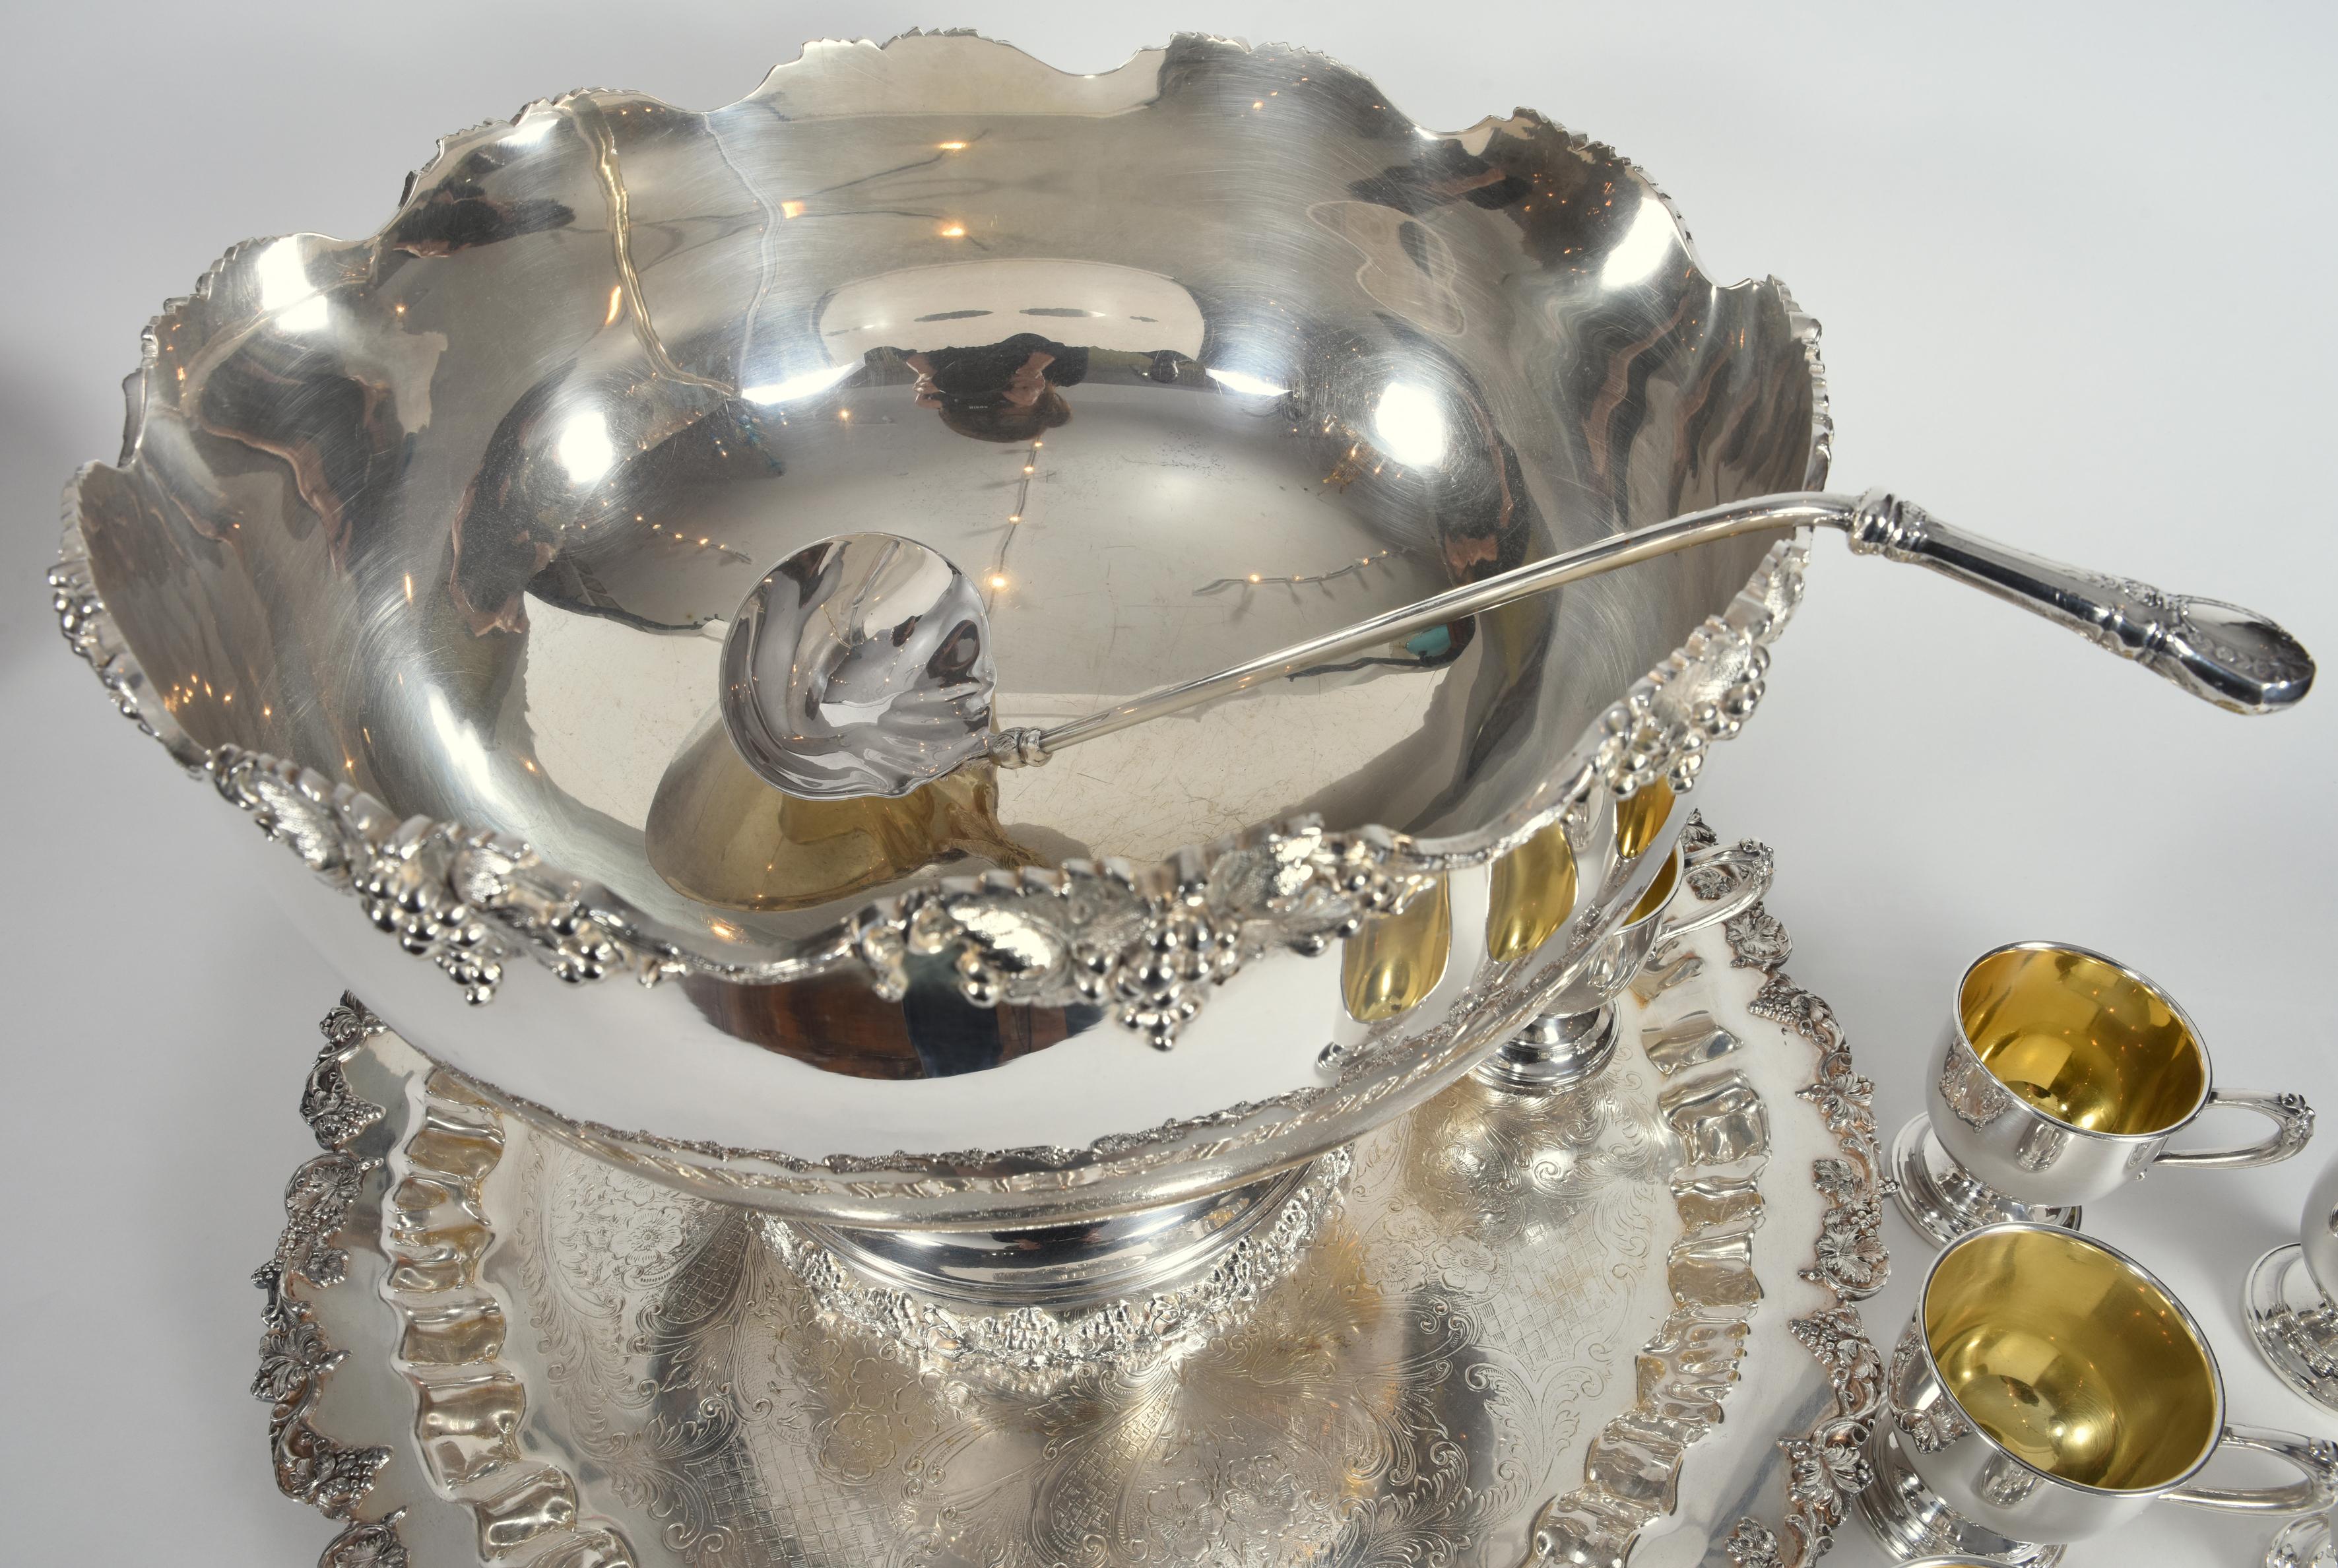 Vintage English Georgian style silver plated or copper fifteen piece punch bowl set, complete with twelve decorative cups with gold wash interior and ladle. The bowl with round holding serving tray are highly decorated with incorporating stylized